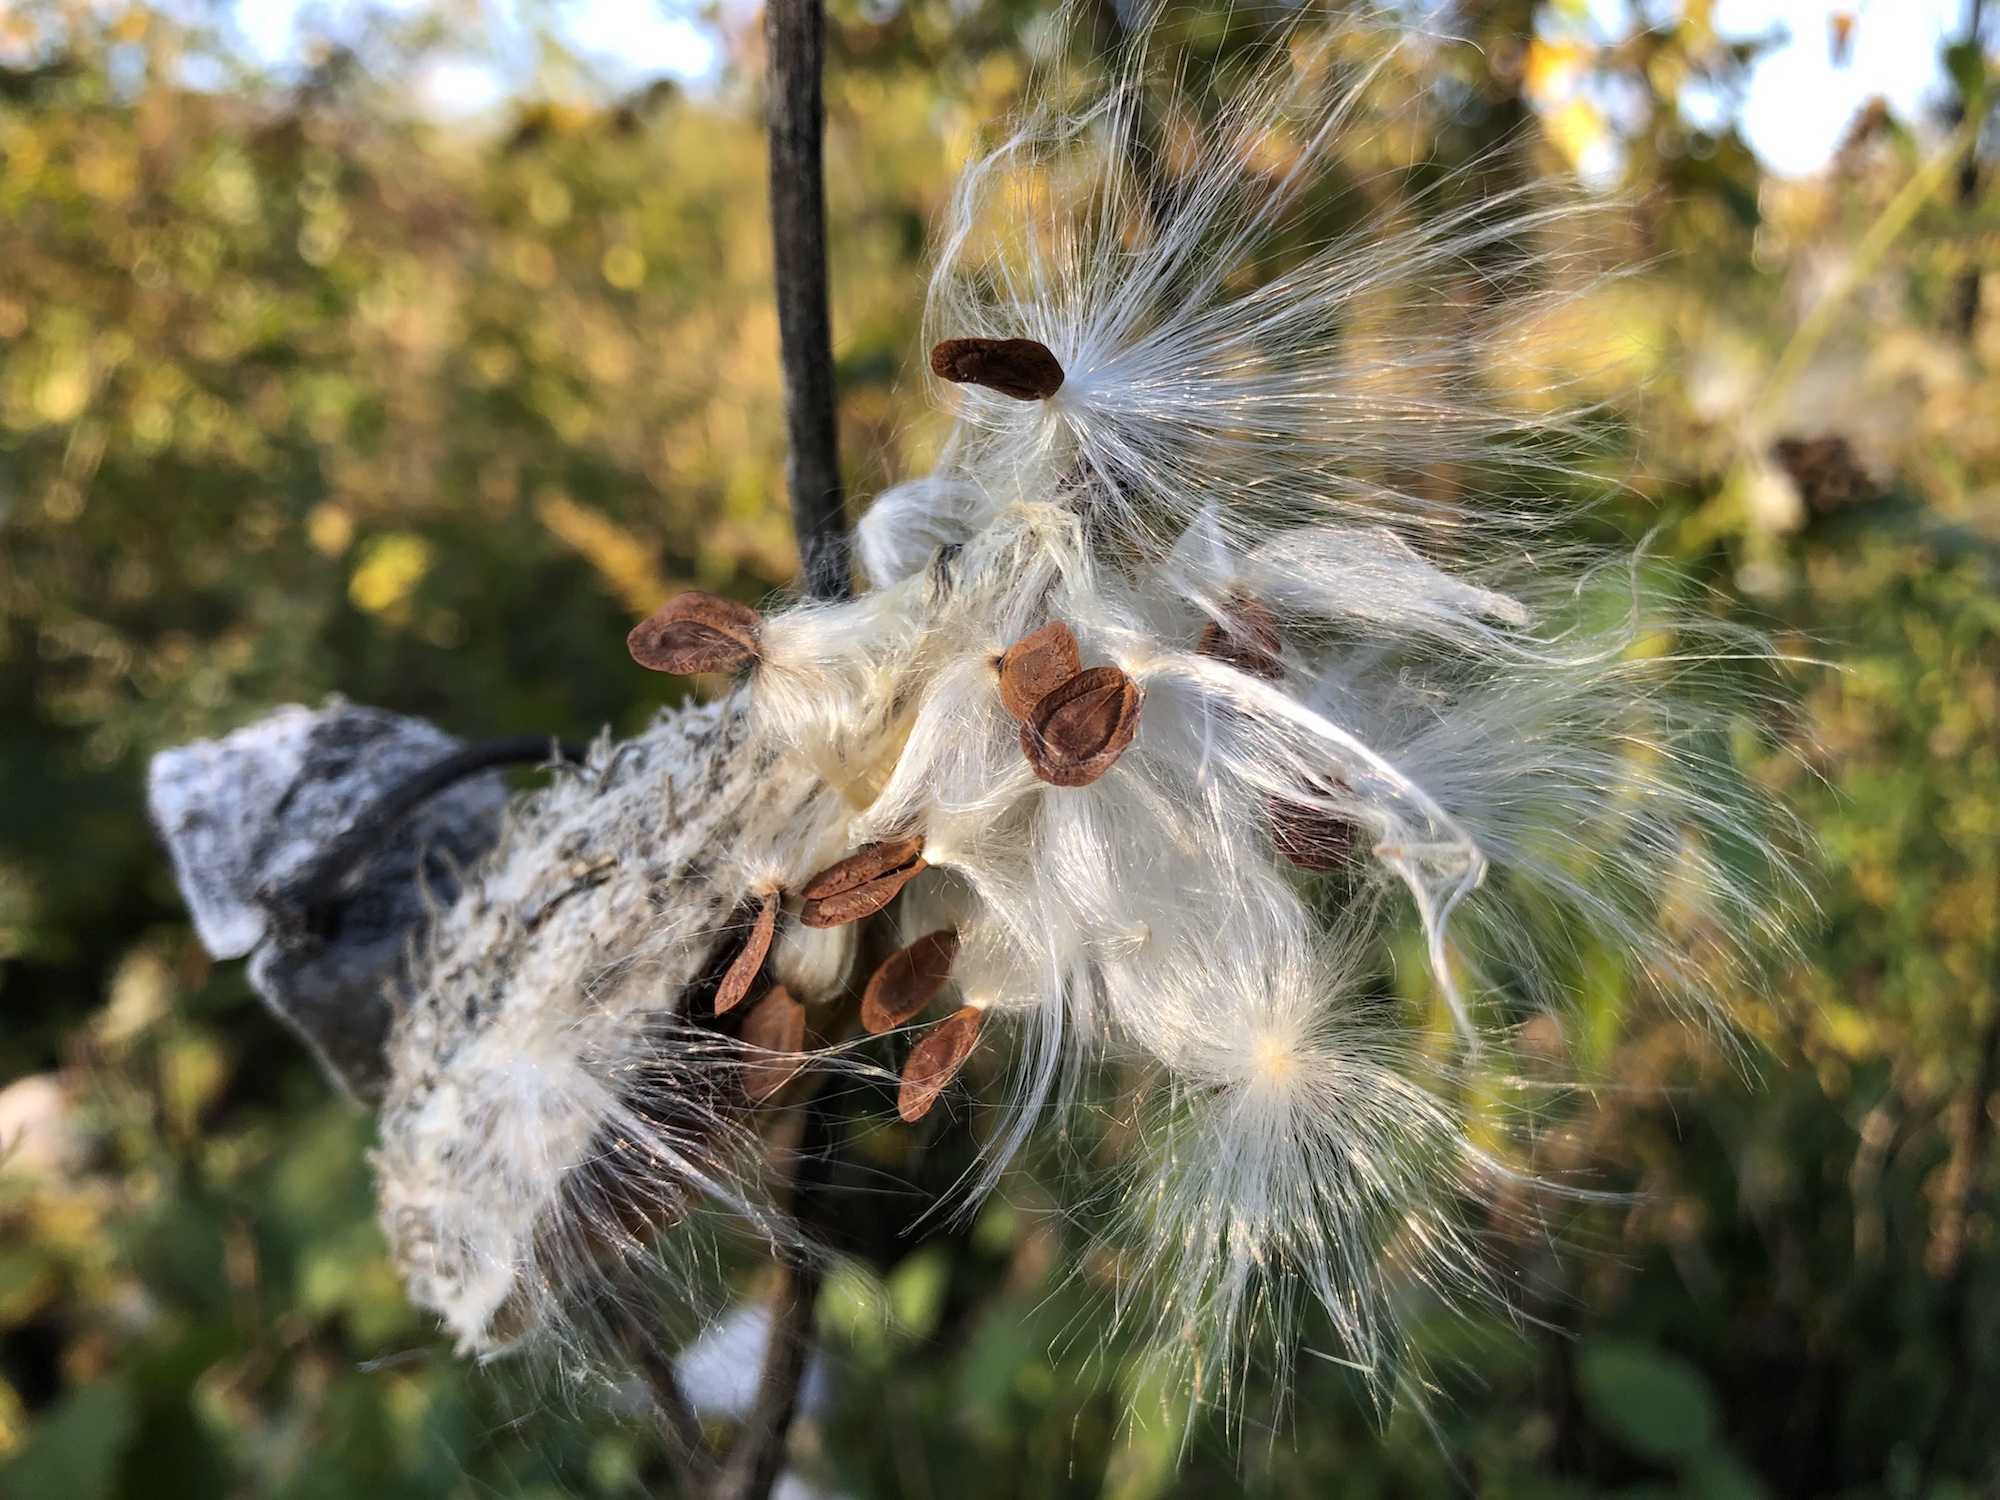 Common Milkweed on shore of Marion Dunn Pond on October 12, 2019.